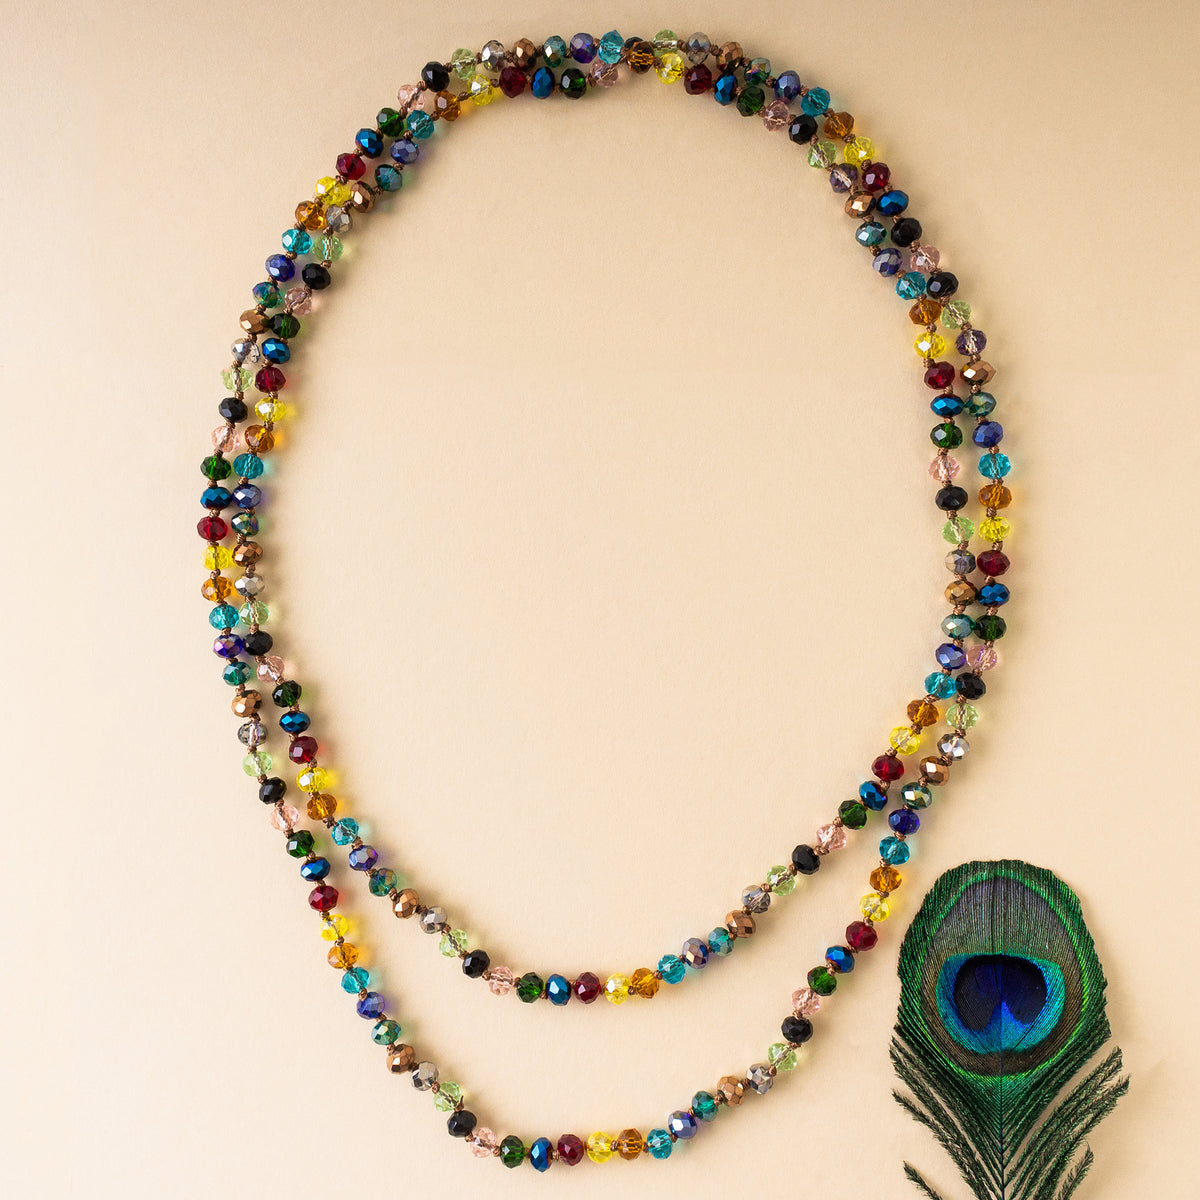 72028-44 - Crystal Beaded Necklace - Multi - Fashion Jewelry Wholesale